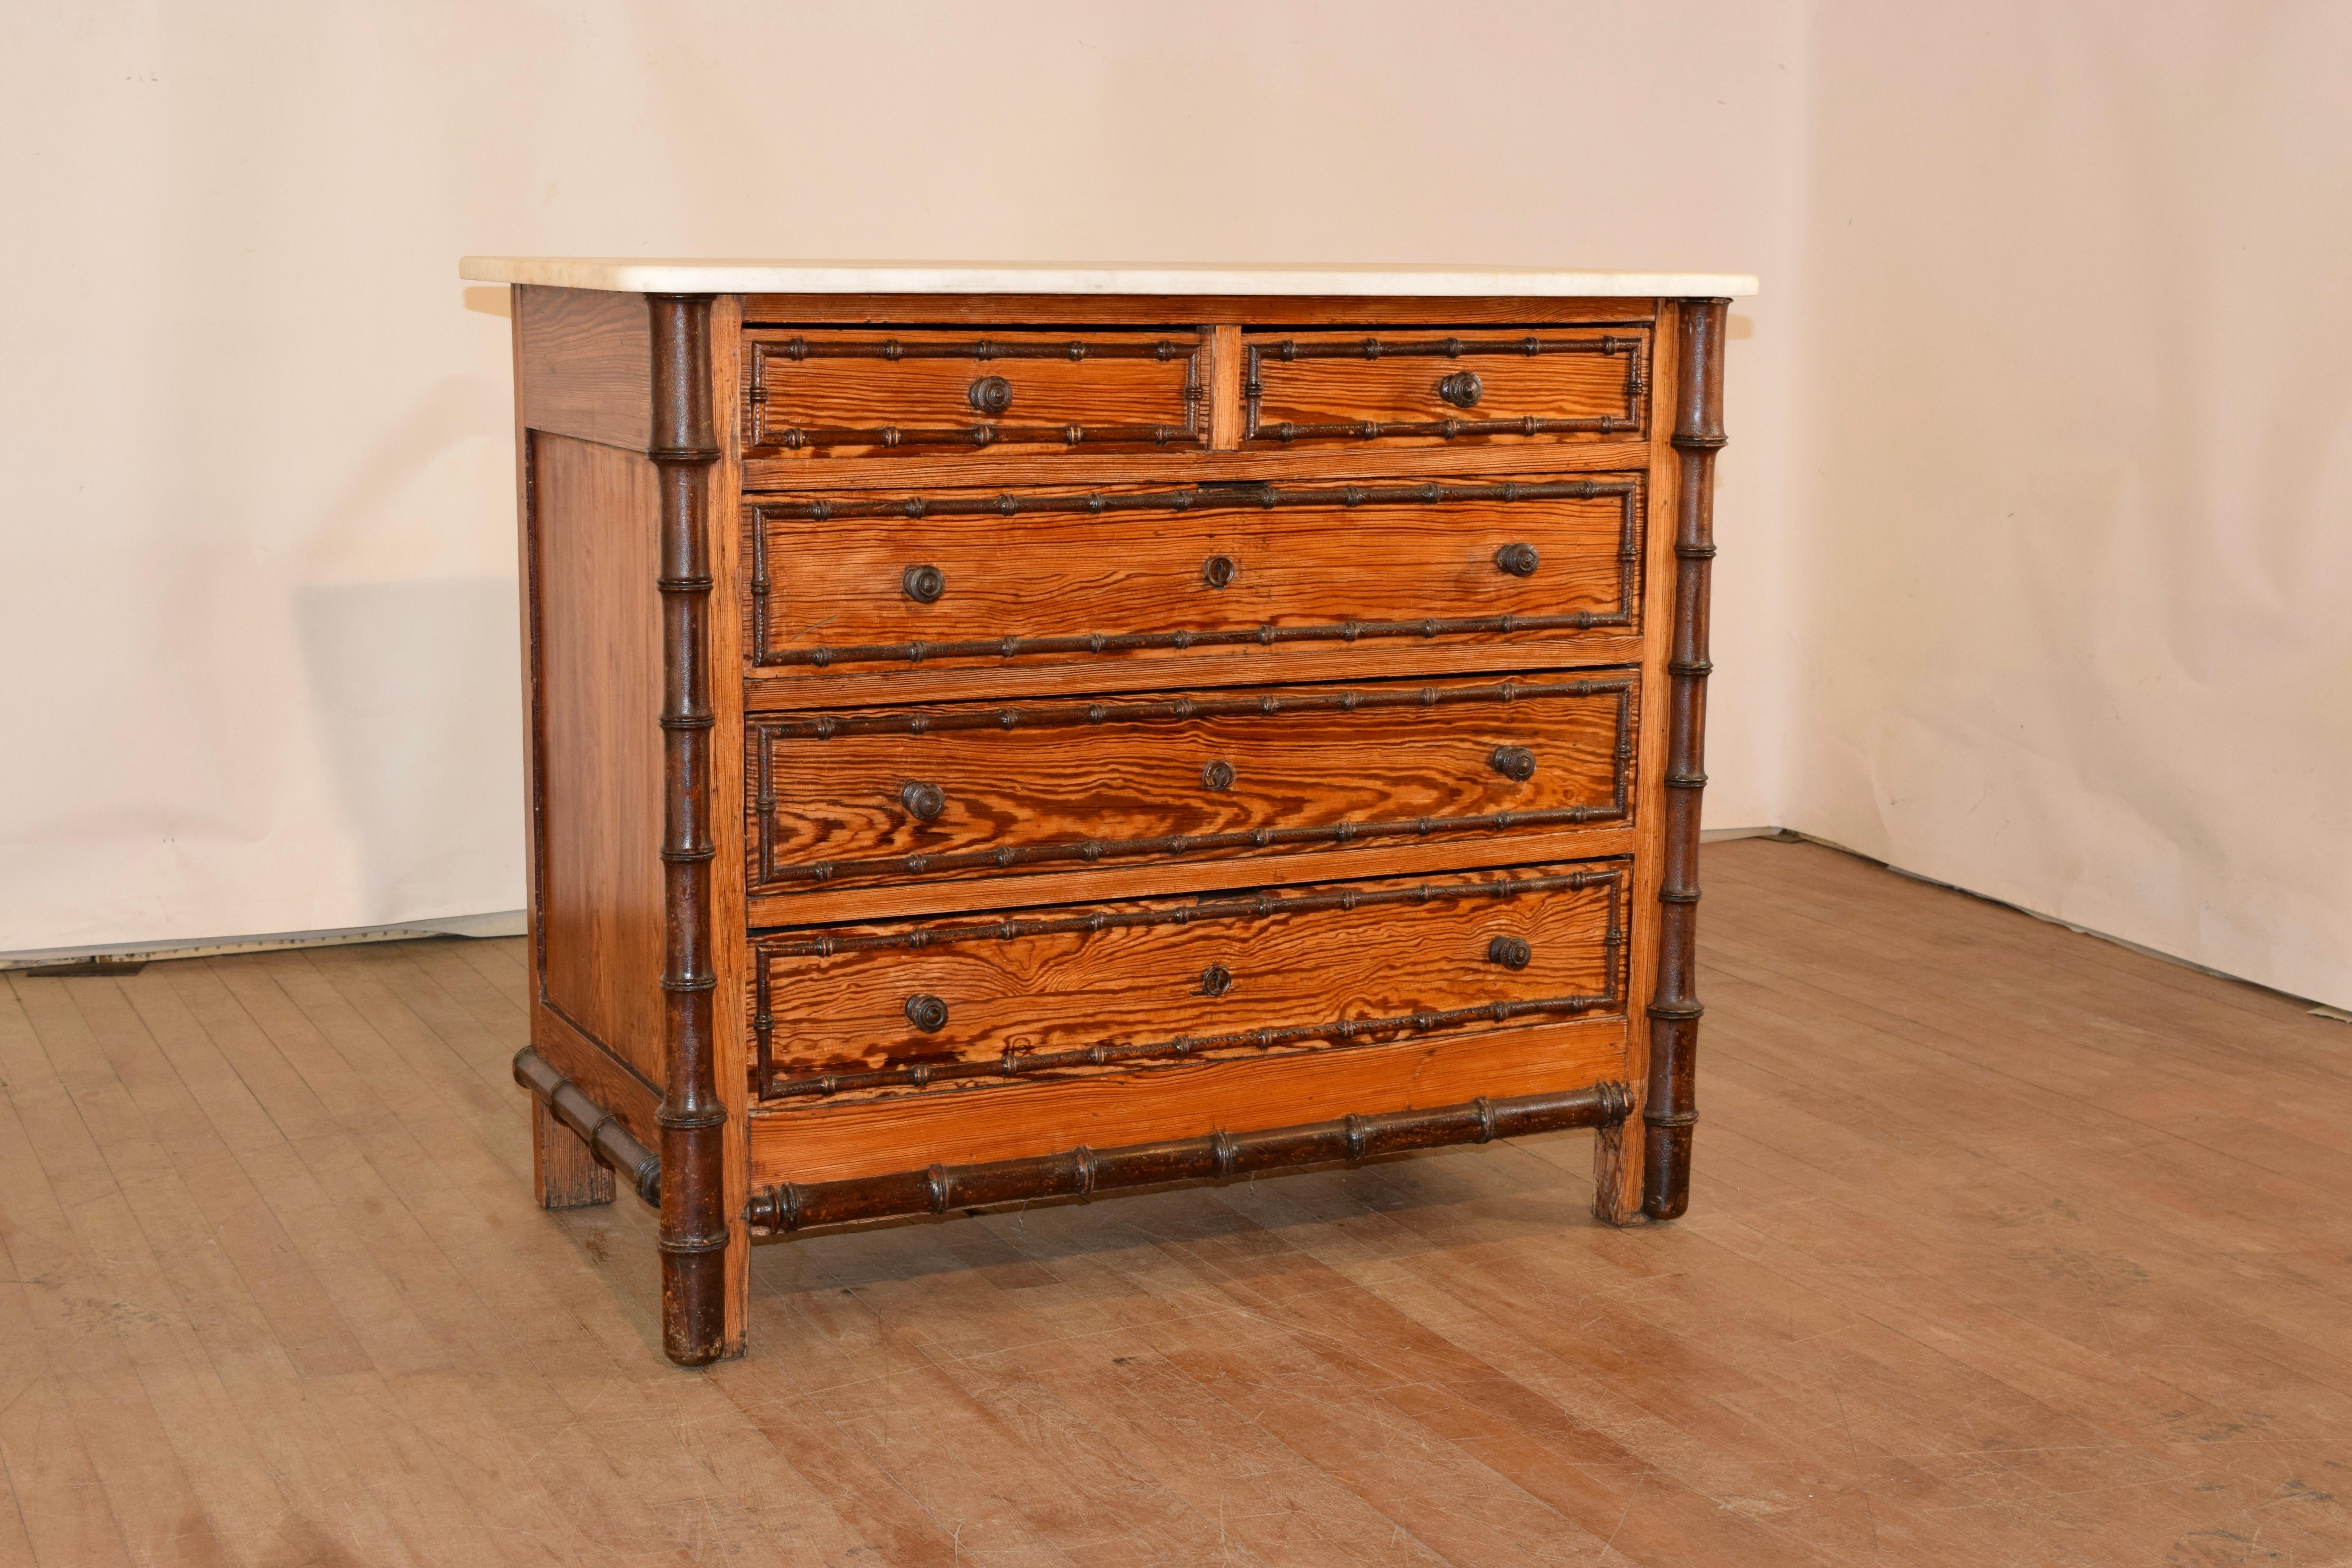 19th century faux bamboo chest of drawers from France with a removable Carrara marble top, following down to a pitch pine case with hand turned cherry wood applied moldings. The case has two over three drawers flanked by hand turned cherry half